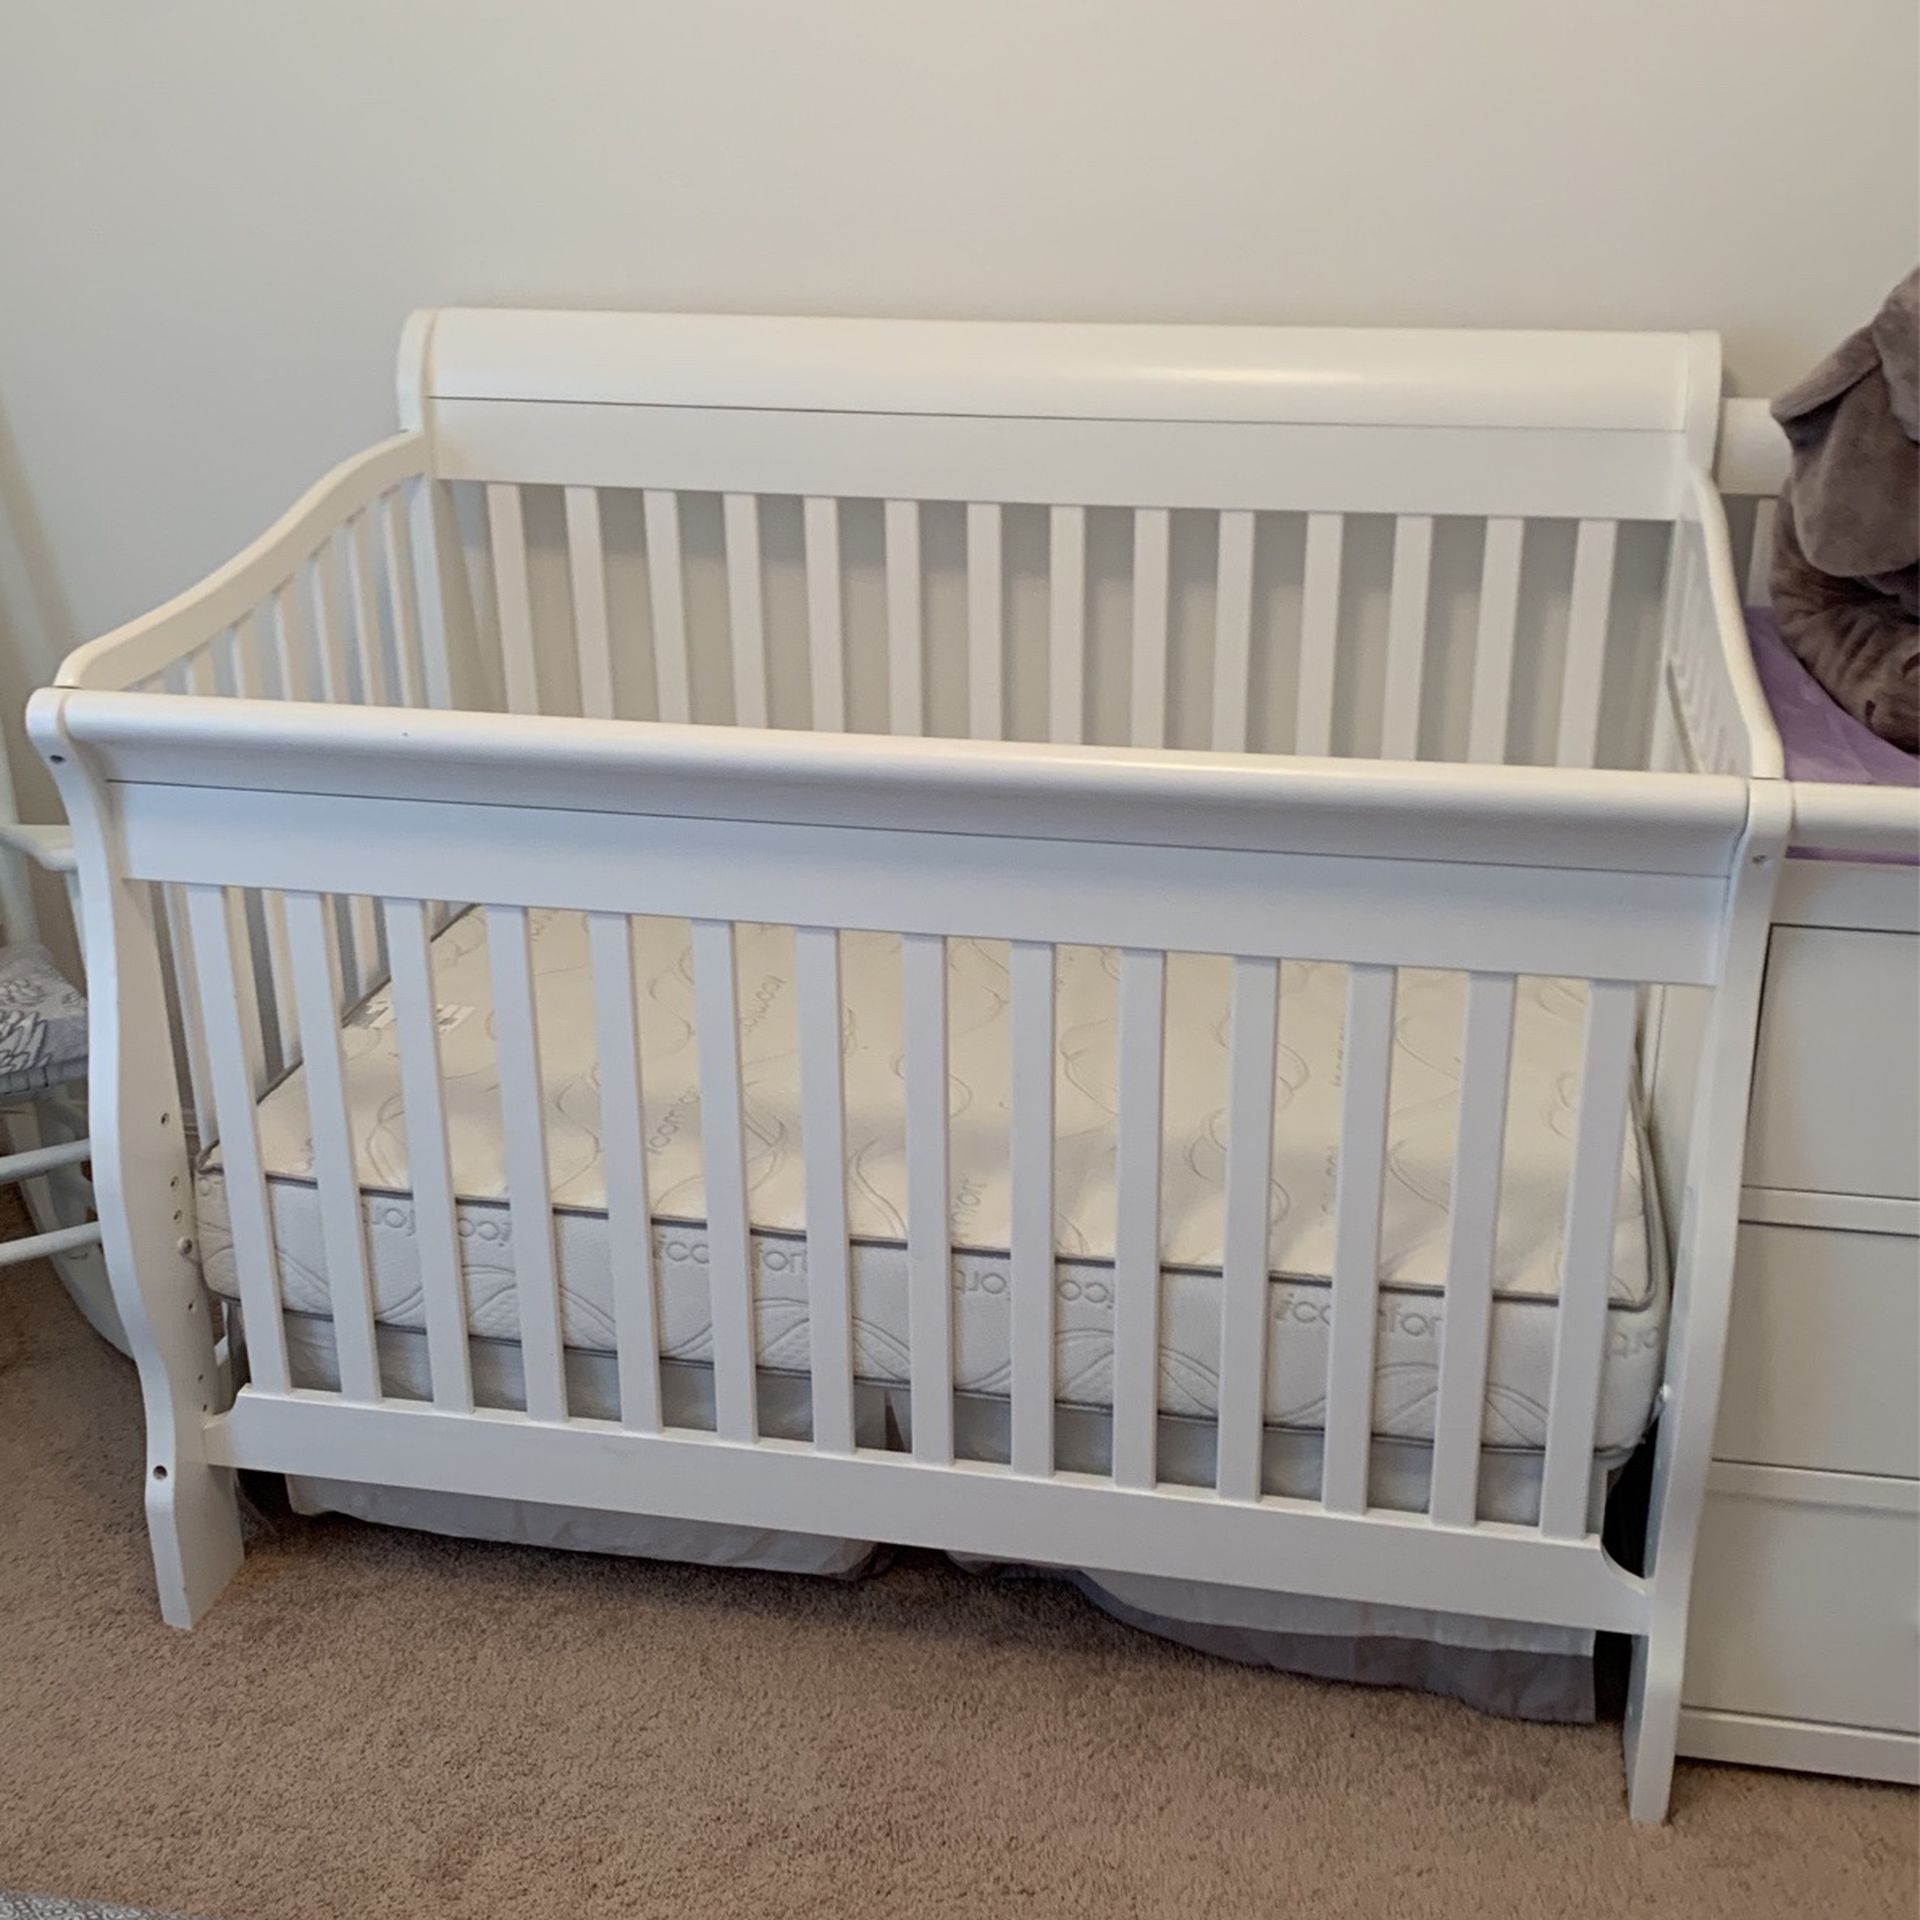 White Crib With Changing Table, Side Storage and Brand New Mattress For Sale For $200